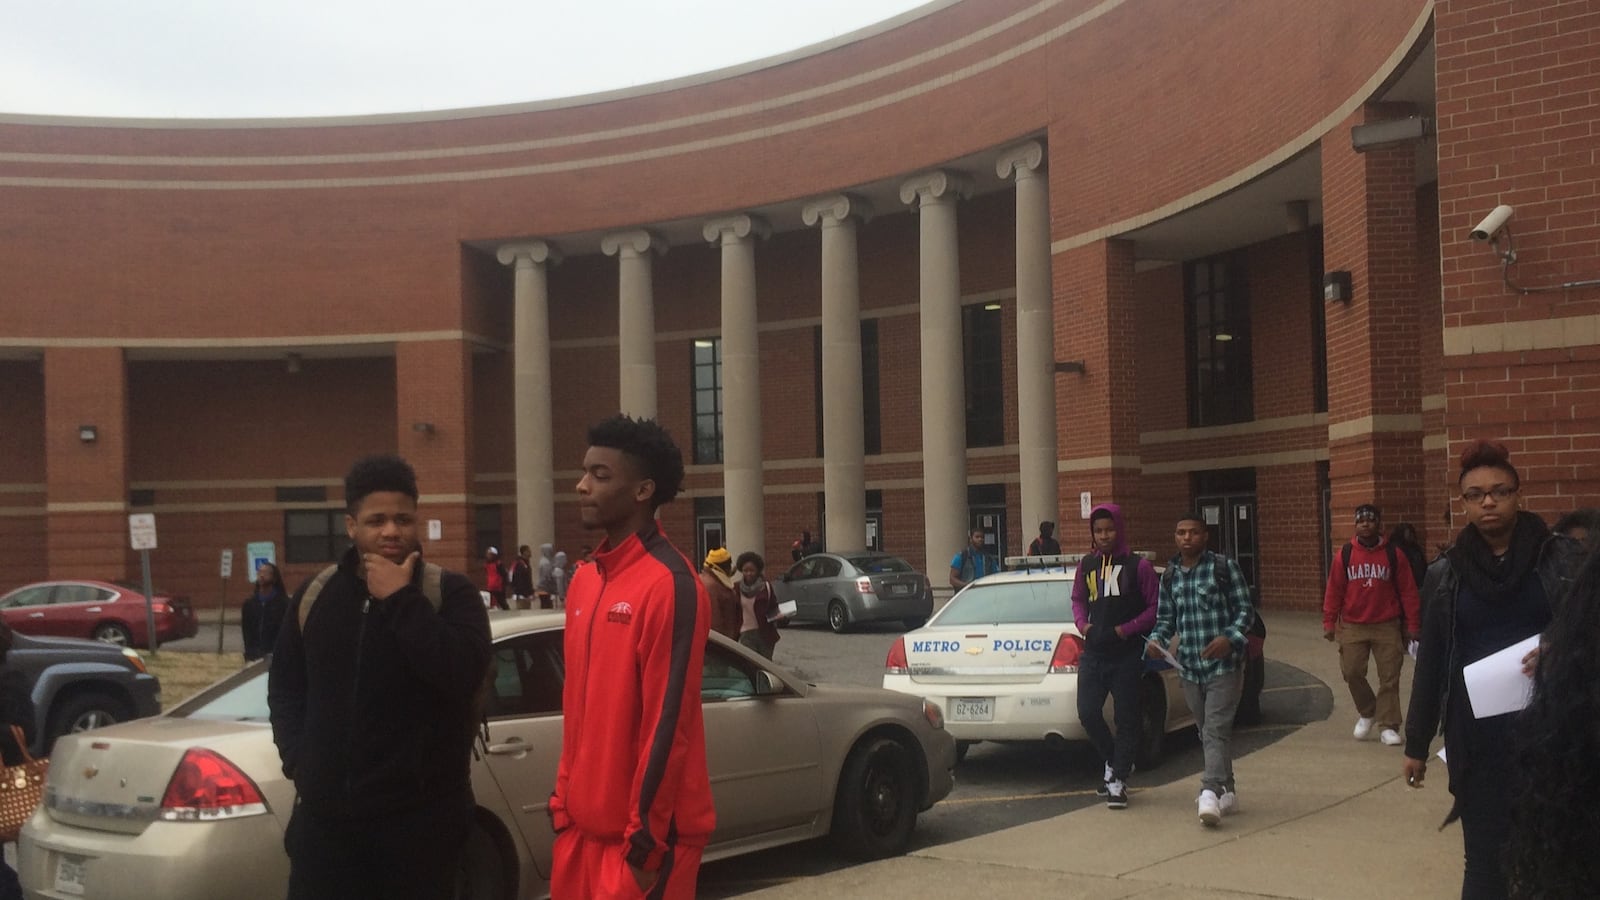 Pearl-Cohn Entertainment Magnet High School in Nashville uses restorative justice techniques as a way of dealing with disciplinary issues issues beyond suspensions.